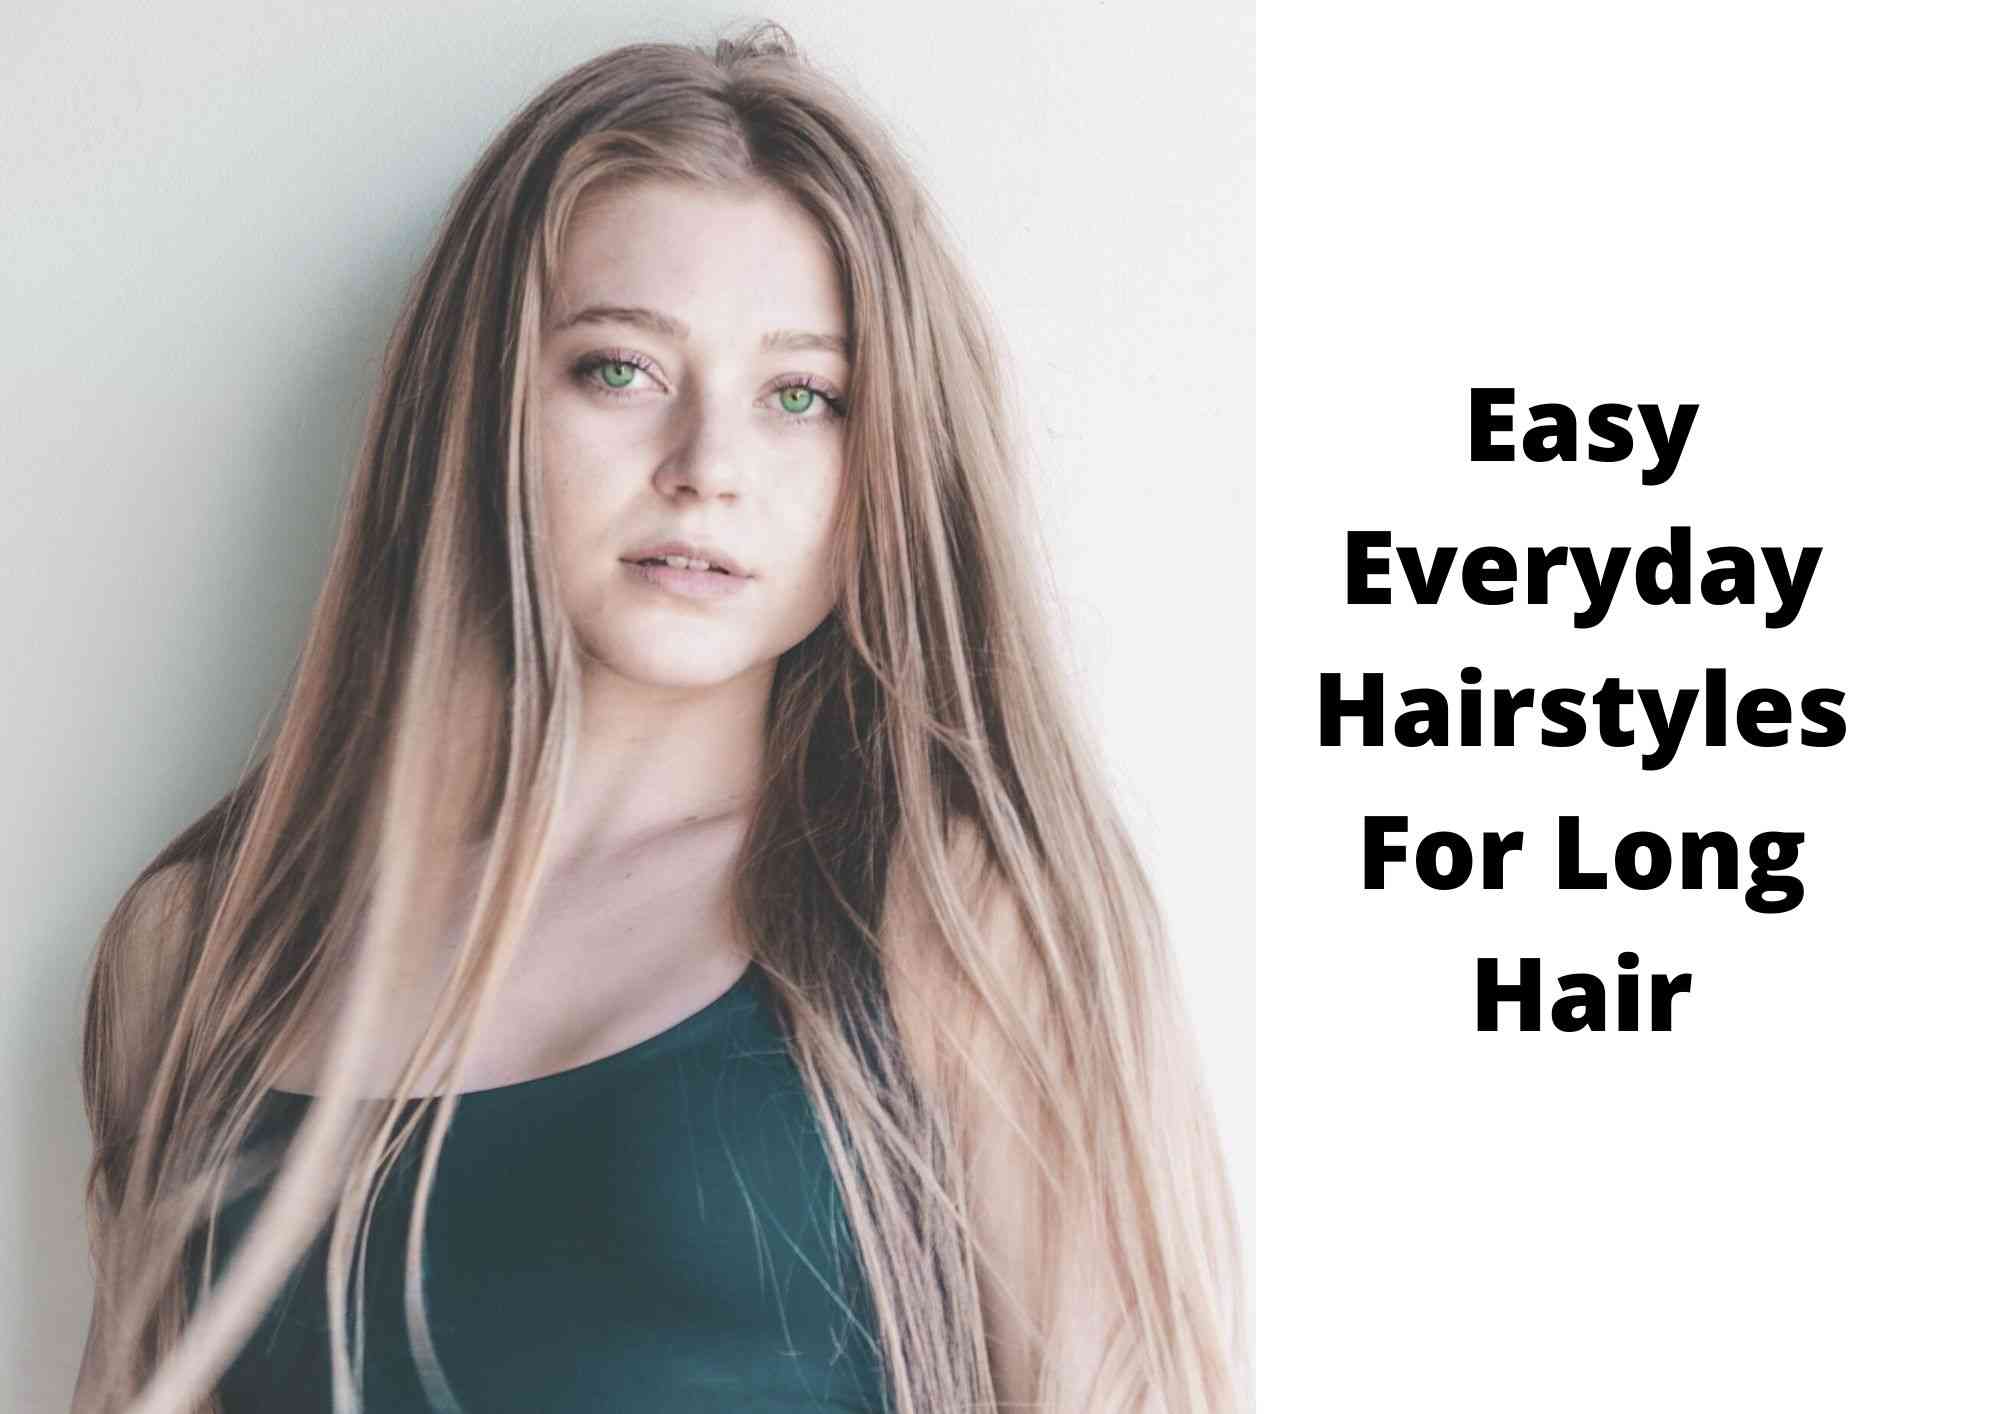 3 QUICK and EASY everyday hairstyles | Cute Long Hair Hairstyles by  LittleGirlHair - YouTube